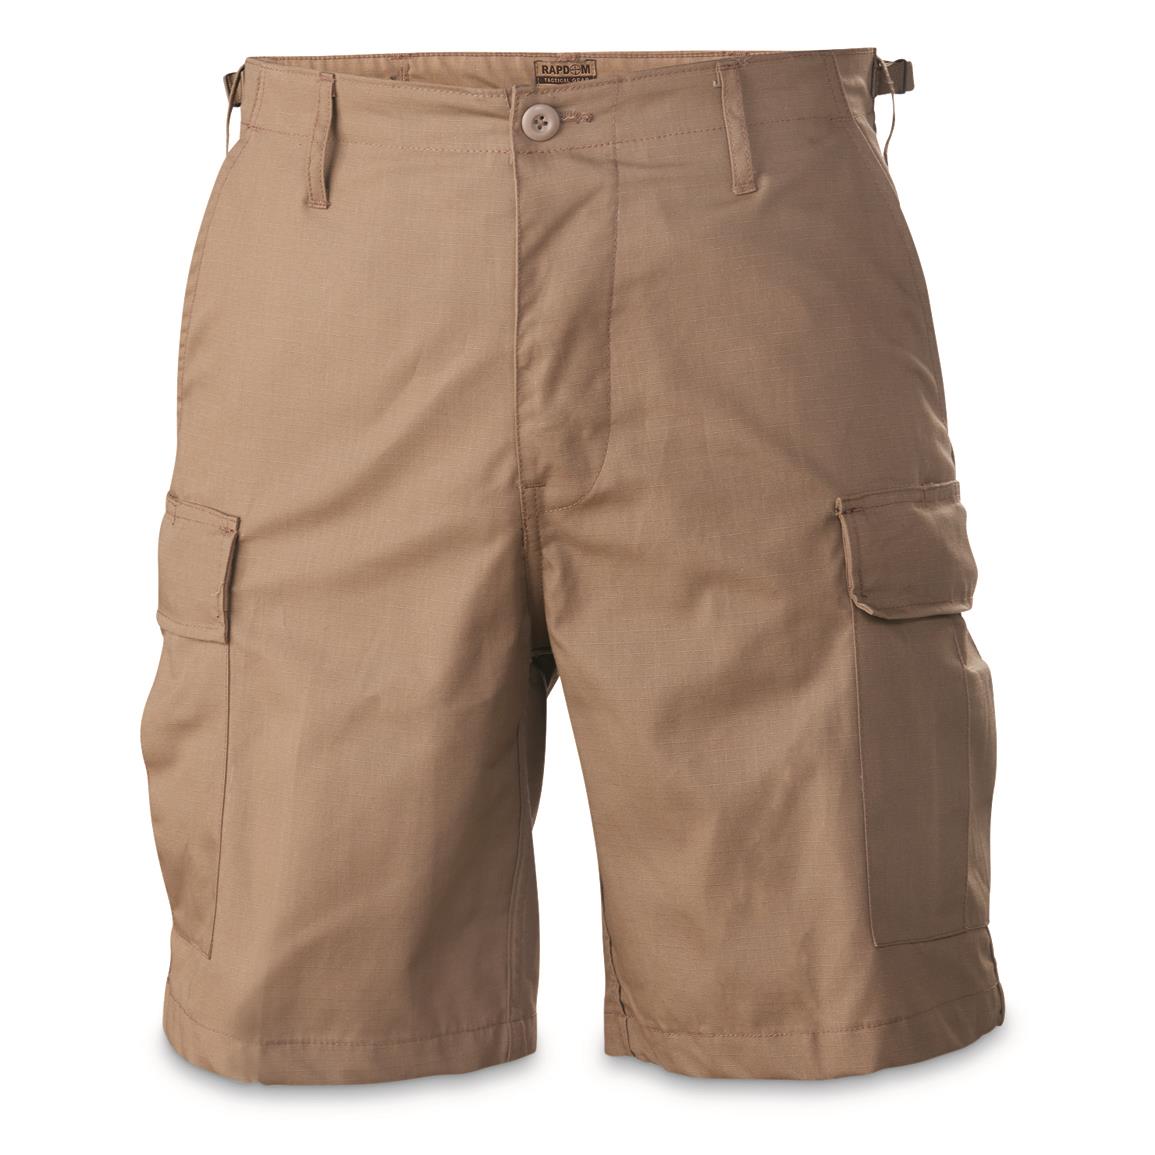 Rapid Dominance T113 Ripstop Shorts, Coyote